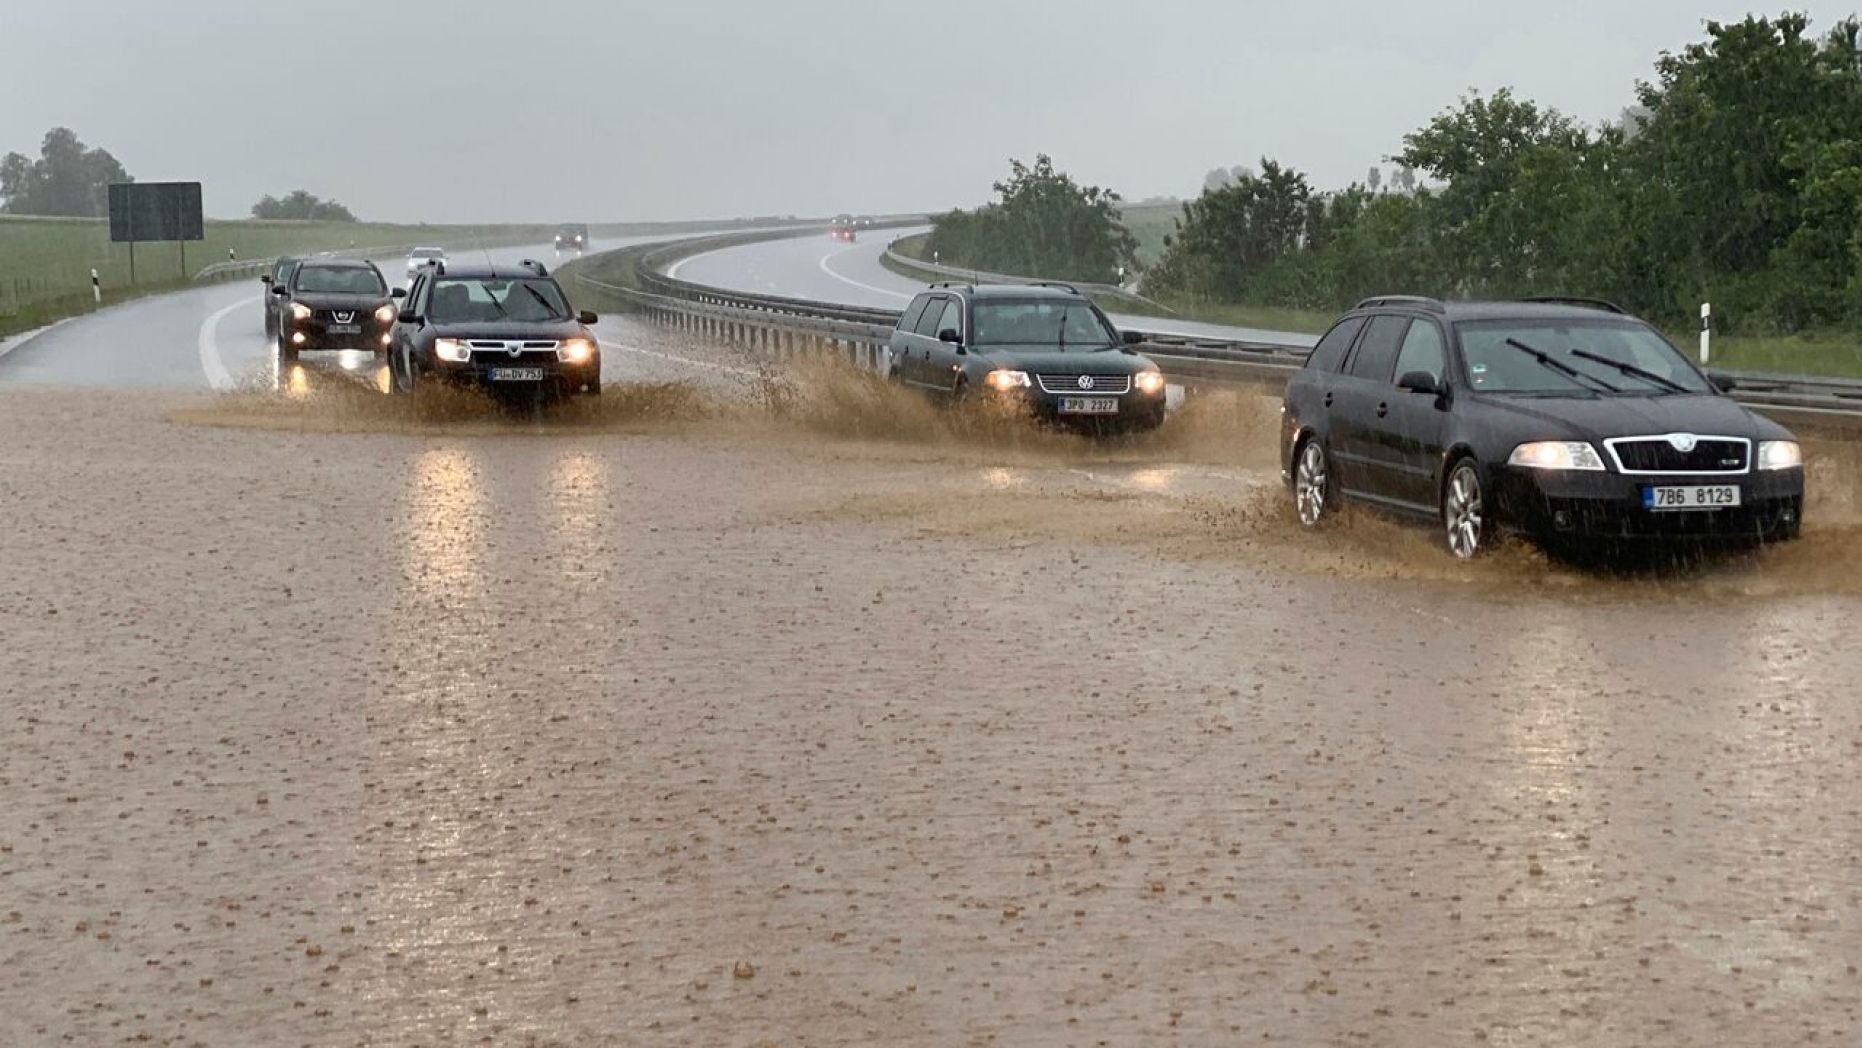 Cars drive in heavy rain on the partially flooded Autobahn in Wieselrieth, Germany, June 14. Heavy storms over the weekend caused numerous floods in the district of Neustadt an der Waldnaab.